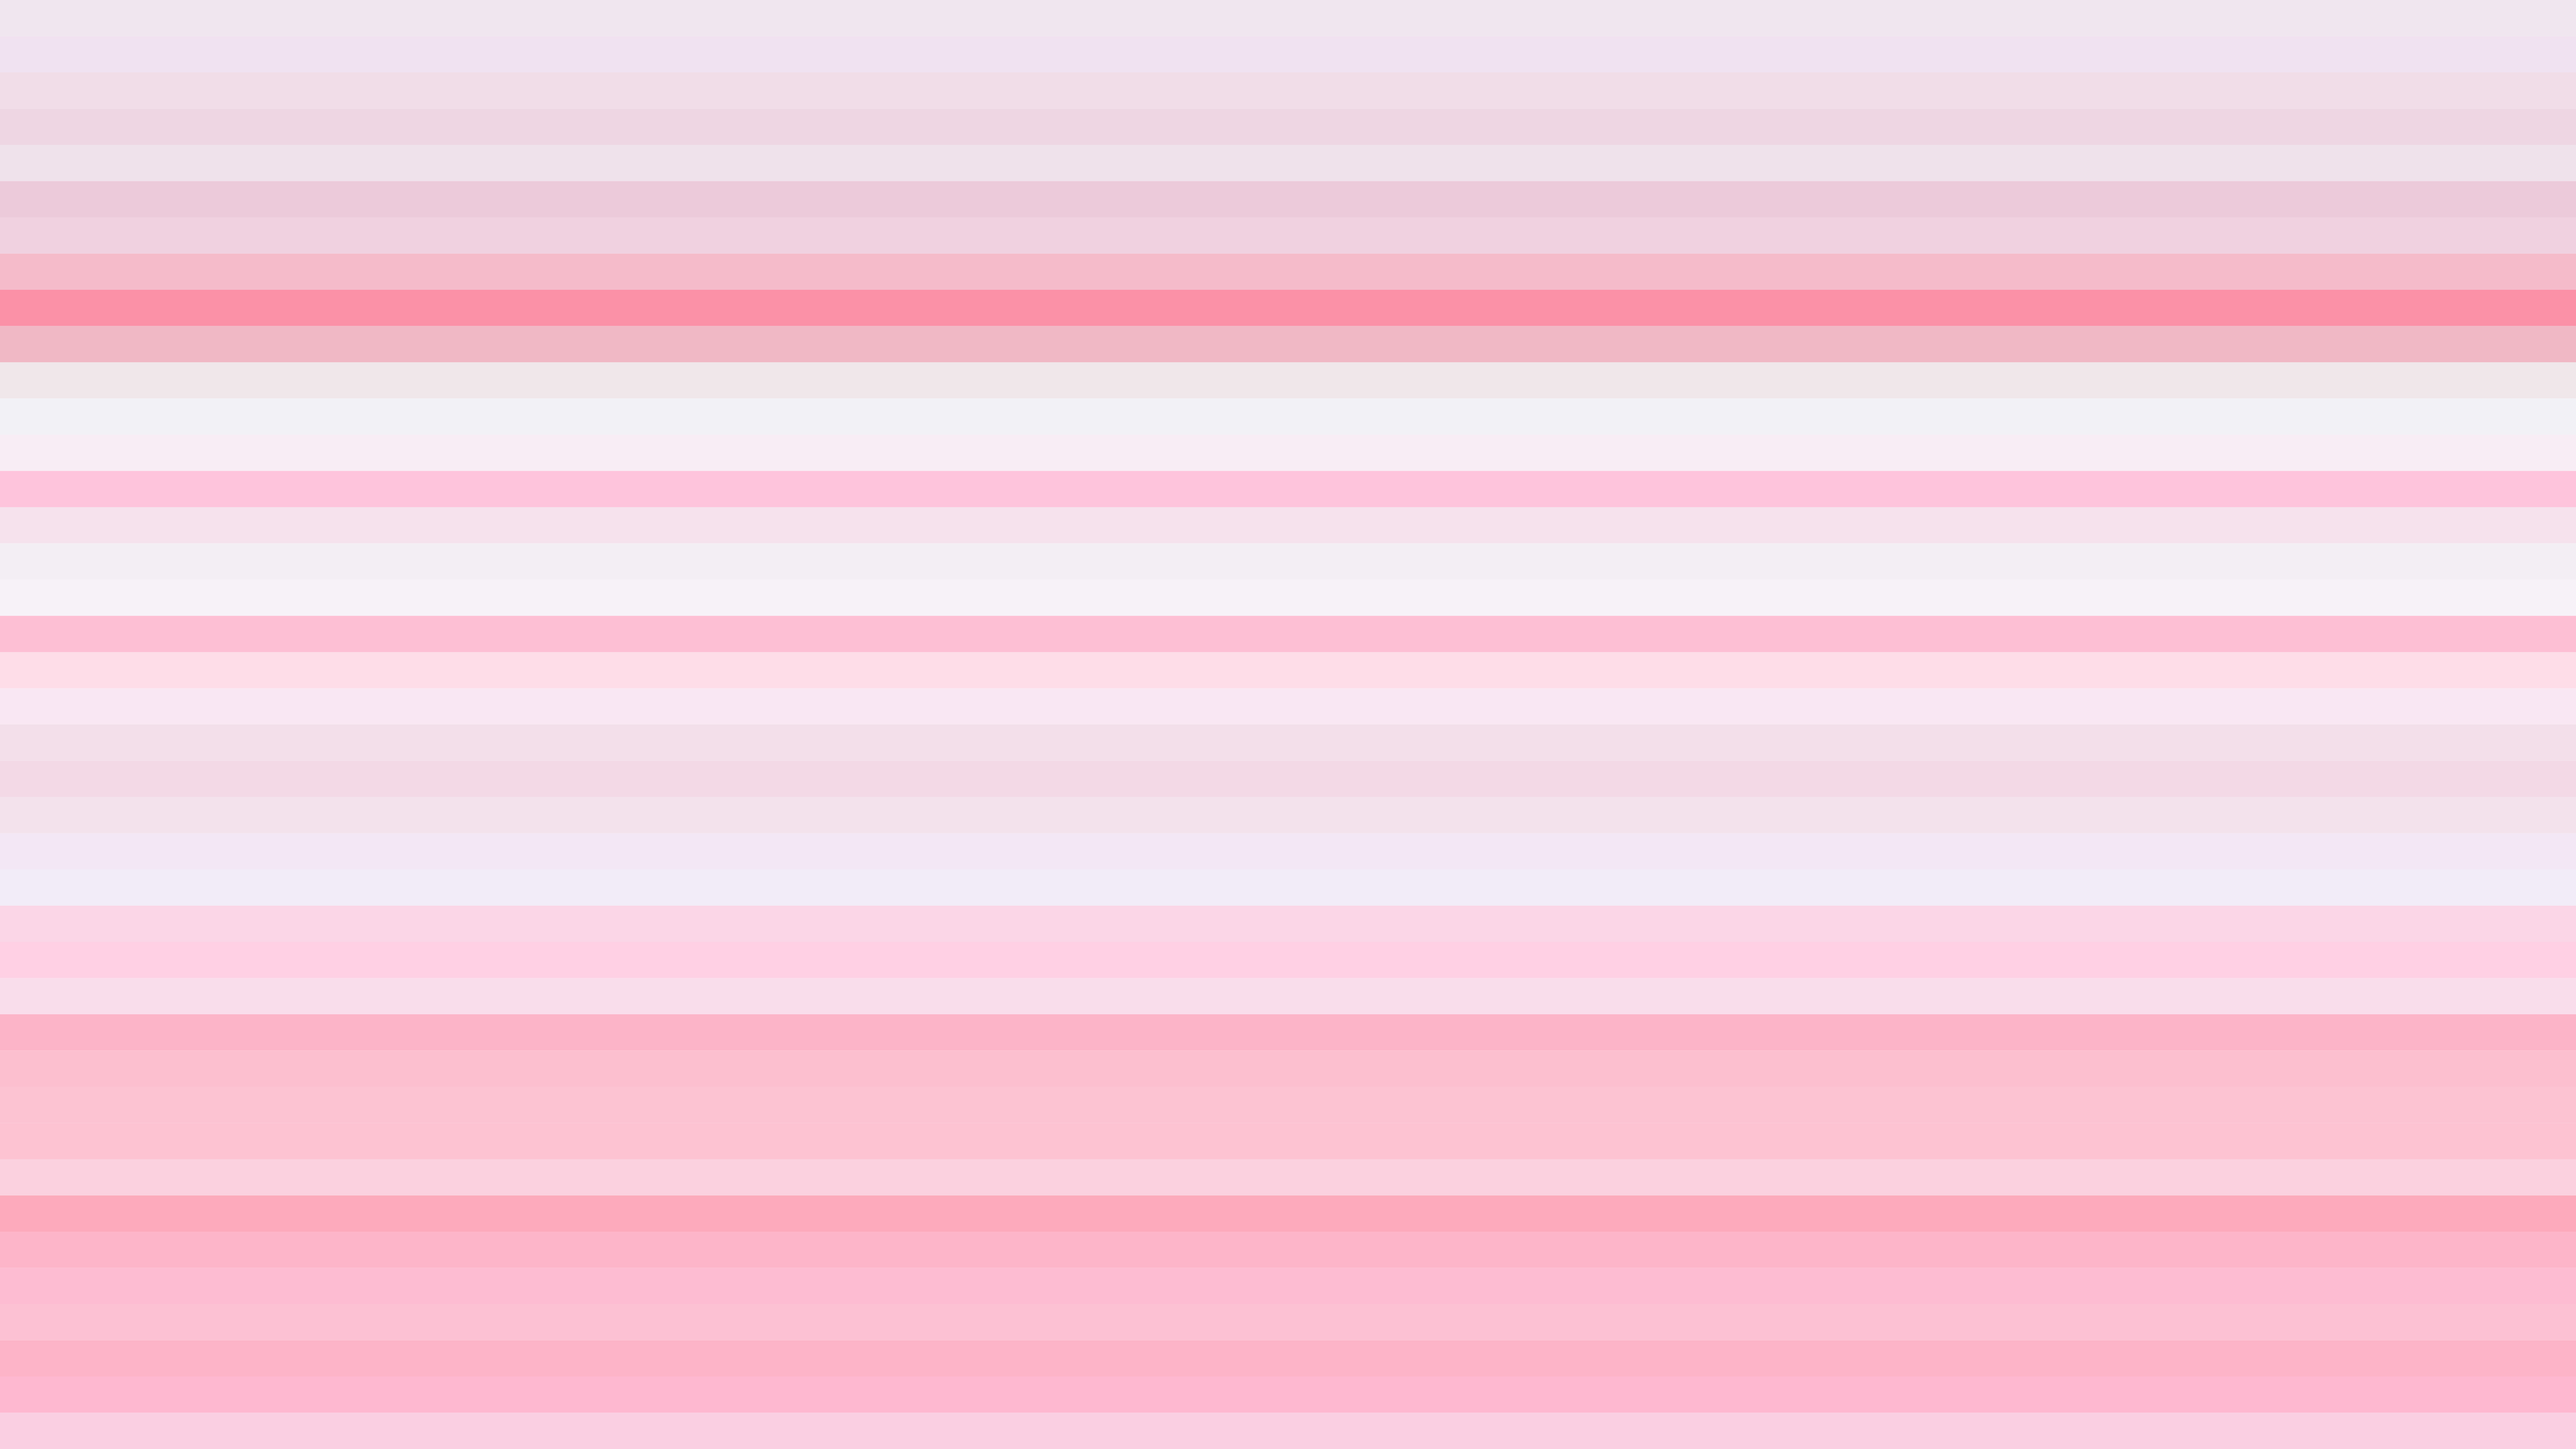 Download free Stripe pink background - Patterns for your next project